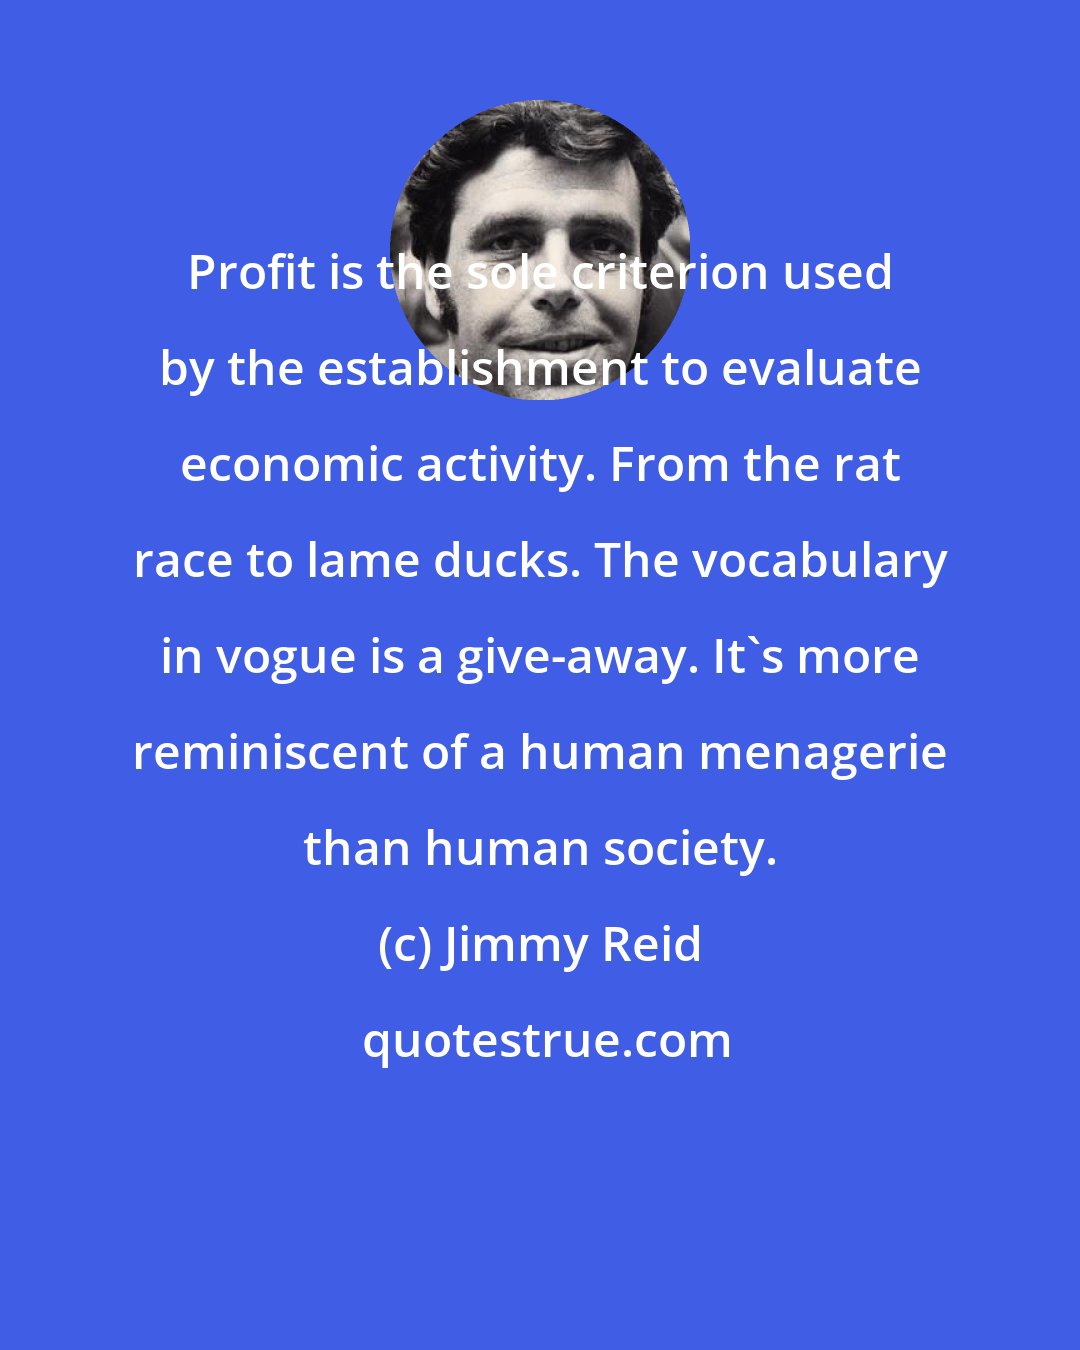 Jimmy Reid: Profit is the sole criterion used by the establishment to evaluate economic activity. From the rat race to lame ducks. The vocabulary in vogue is a give-away. It's more reminiscent of a human menagerie than human society.